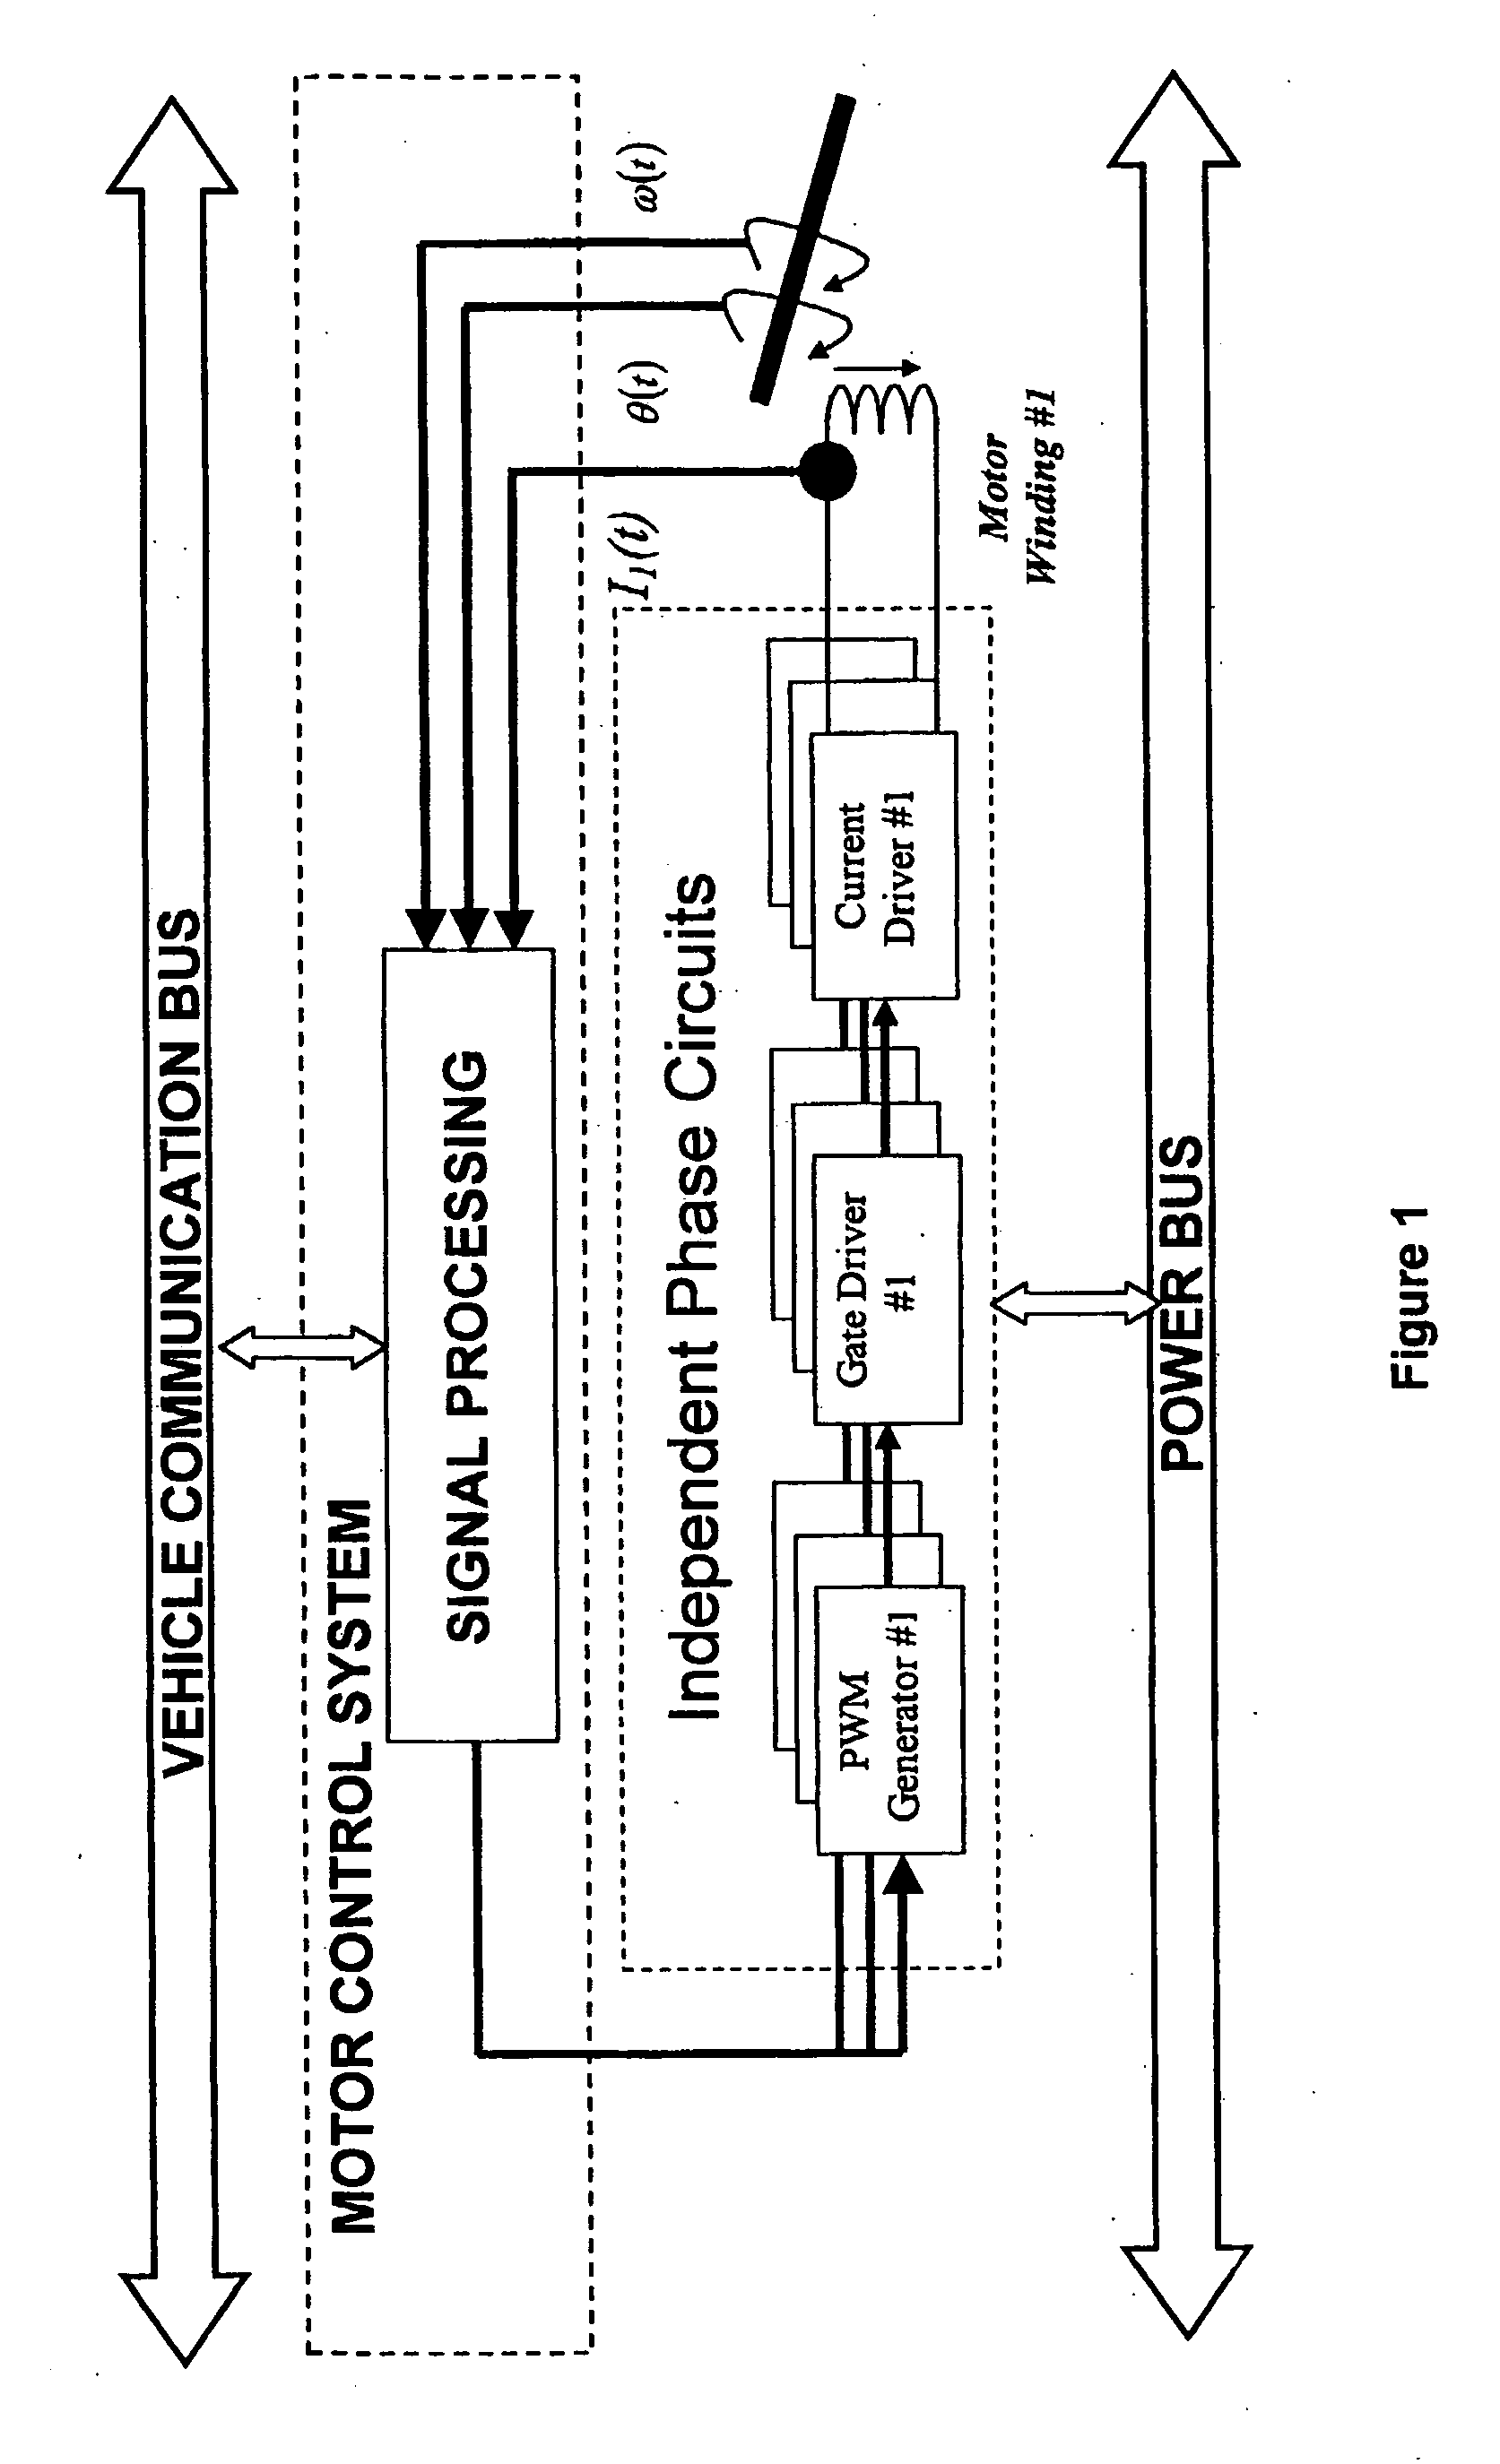 Software-based adaptive control system for electric motors and generators